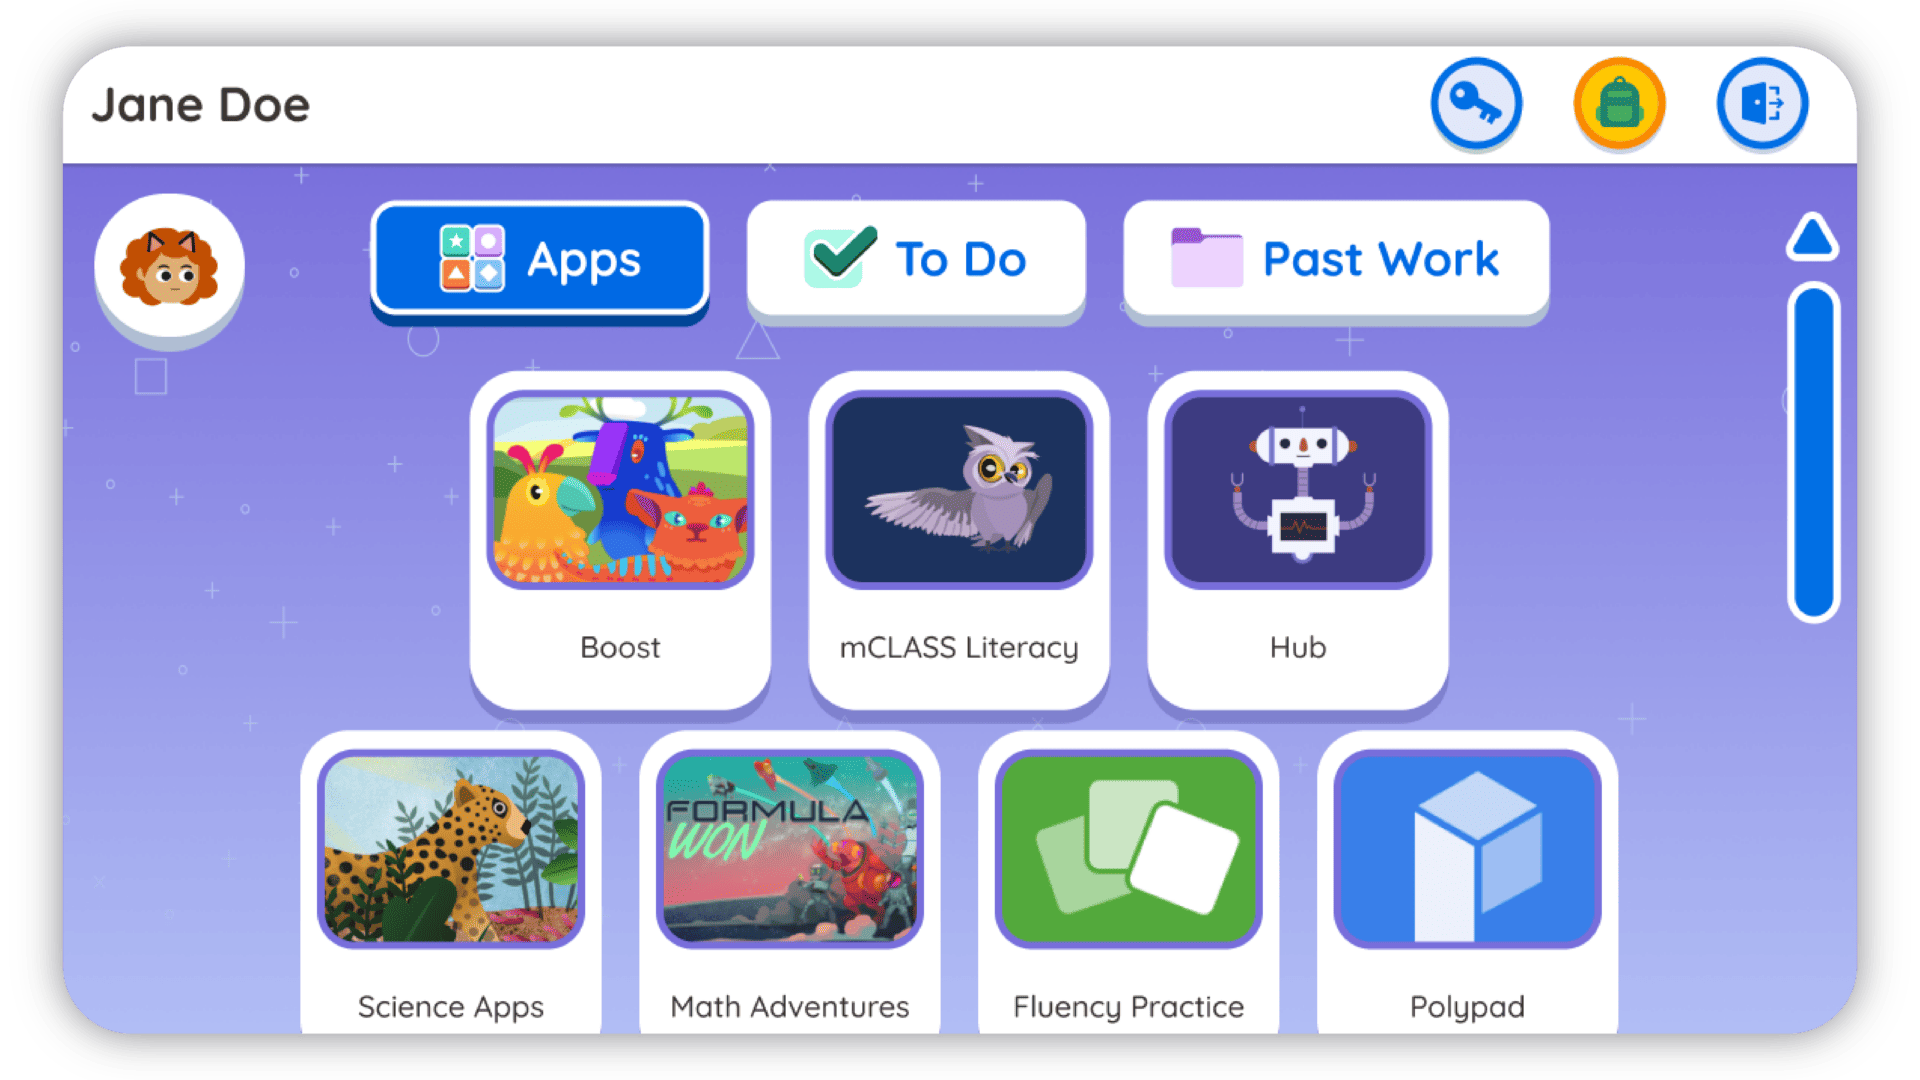 Educational interface featuring user 'Jane Doe' and various colorful app icons like 'Boost Reading', 'mclass literacy', 'hub,' and others labeled 'science apps', 'math adventures', ‘flu